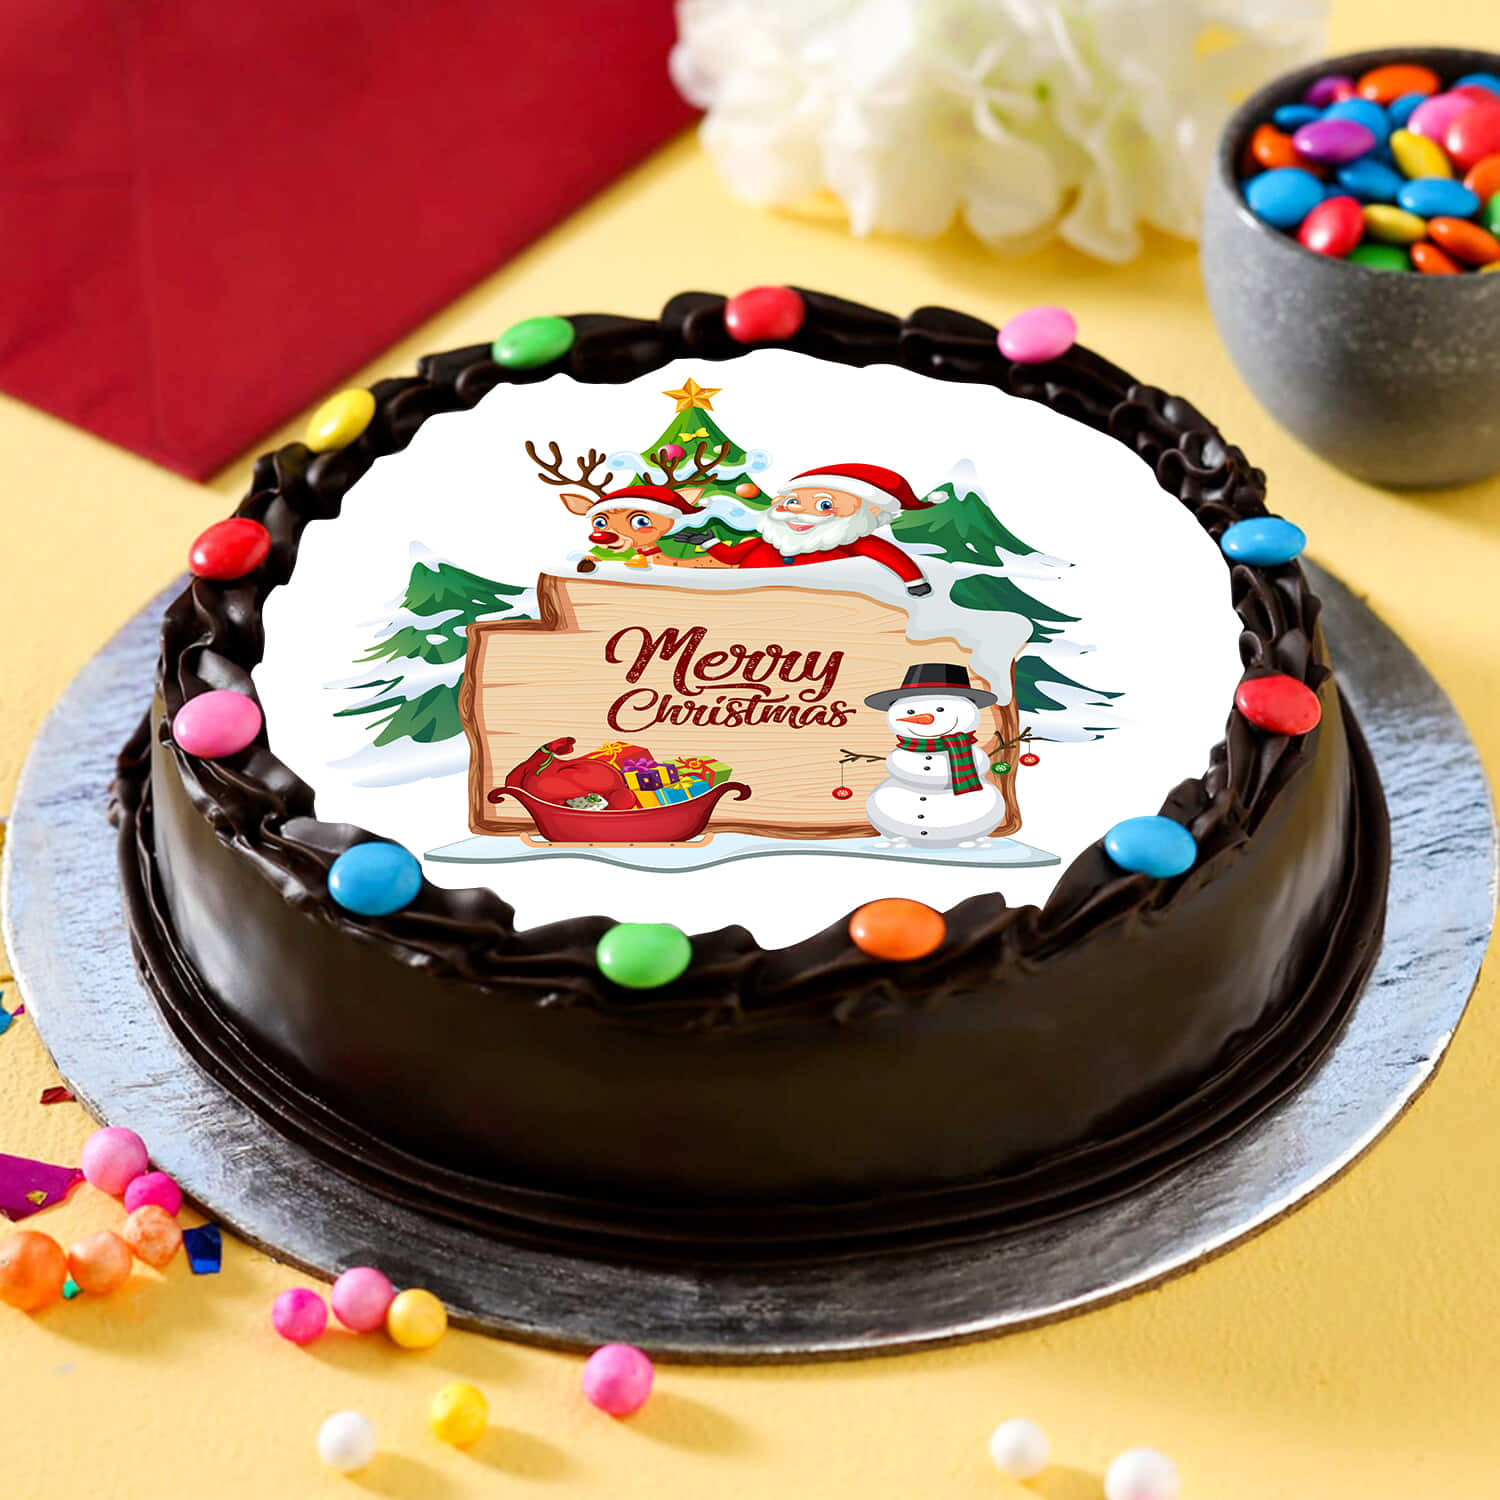 Send Christmas Cakes to Thrissur For Family ₹445 | Online cake delivery,  Cake, Cake delivery